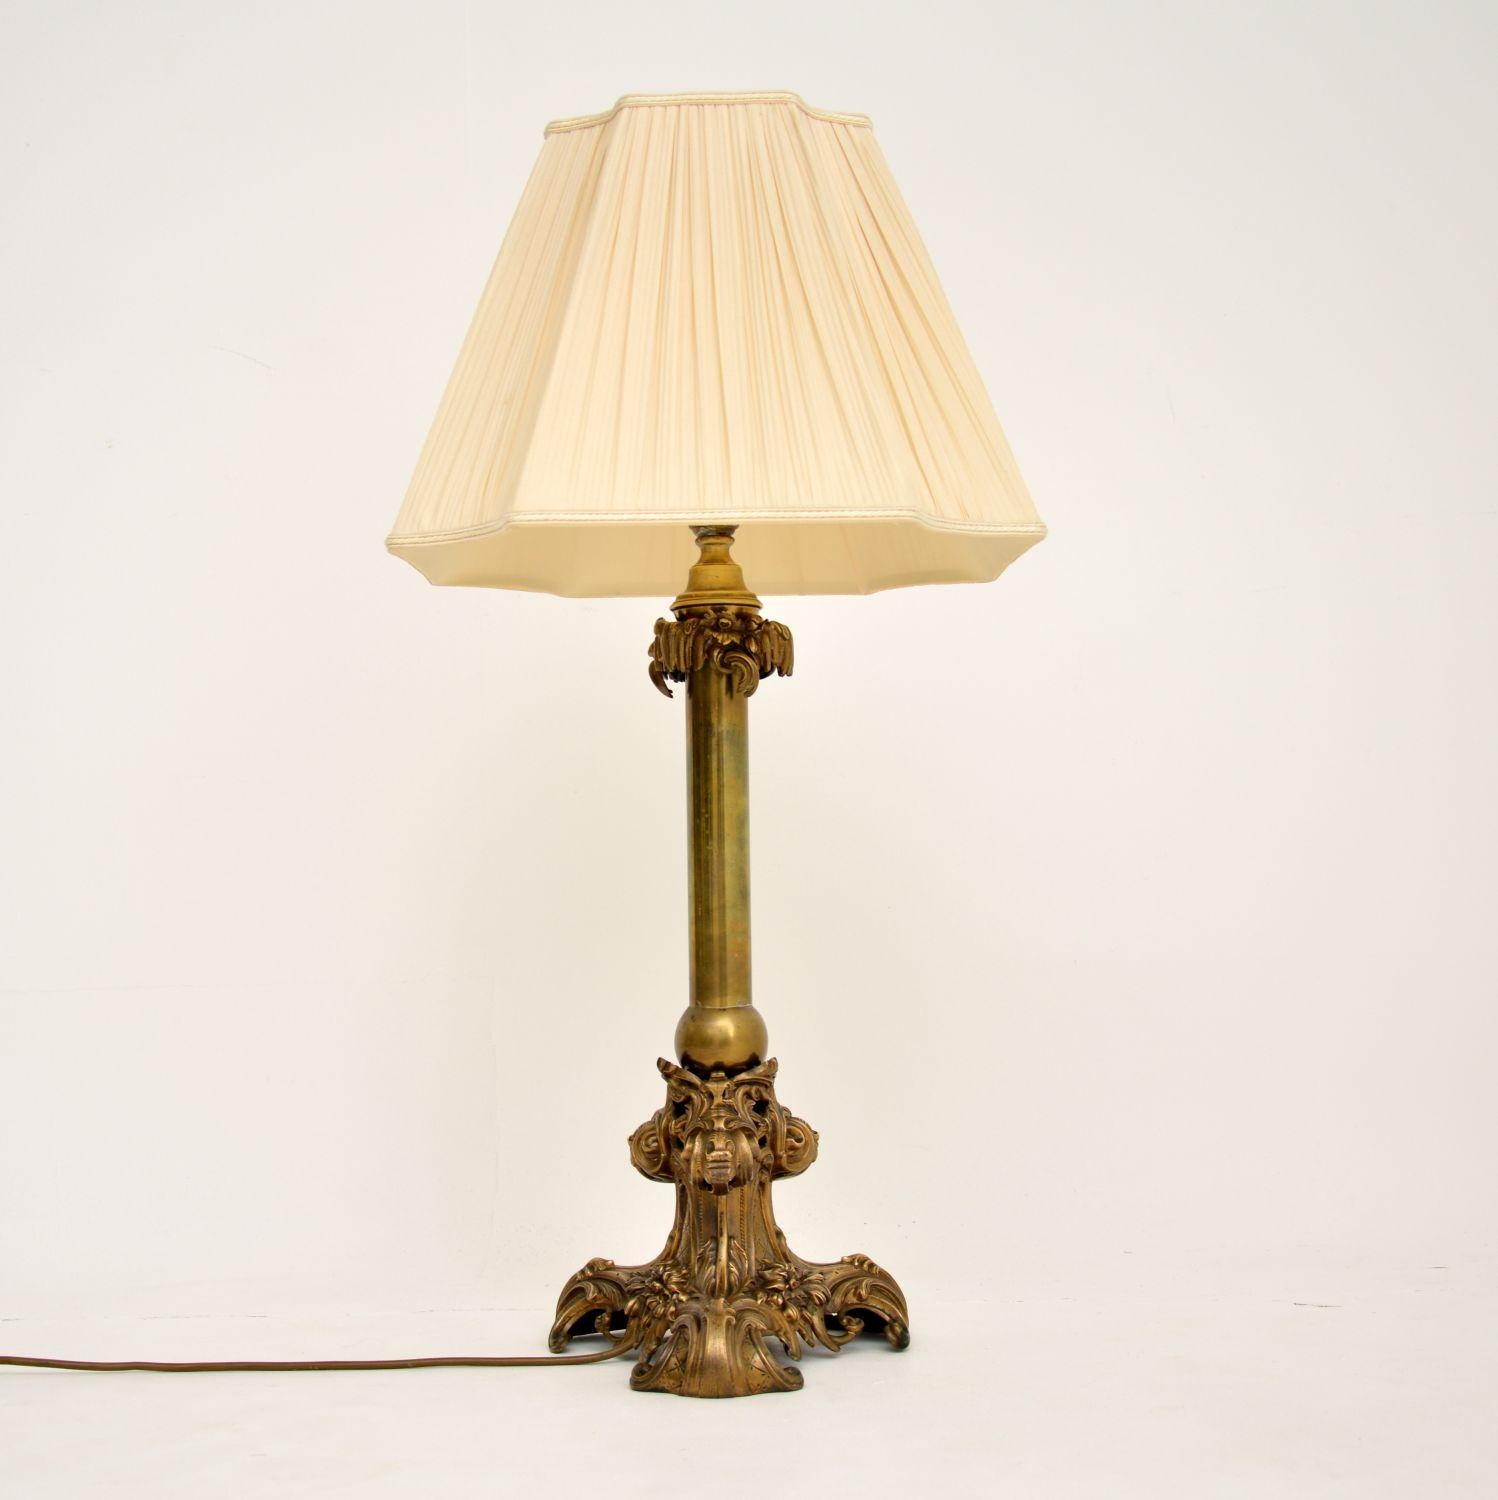 A stunning and rarely seen Victorian table lamp of the highest order. This was made in England, it dates from around the 1880-1900 period.

The quality is absolutely outstanding, with beautiful and intricate detailing all over the base. It is a